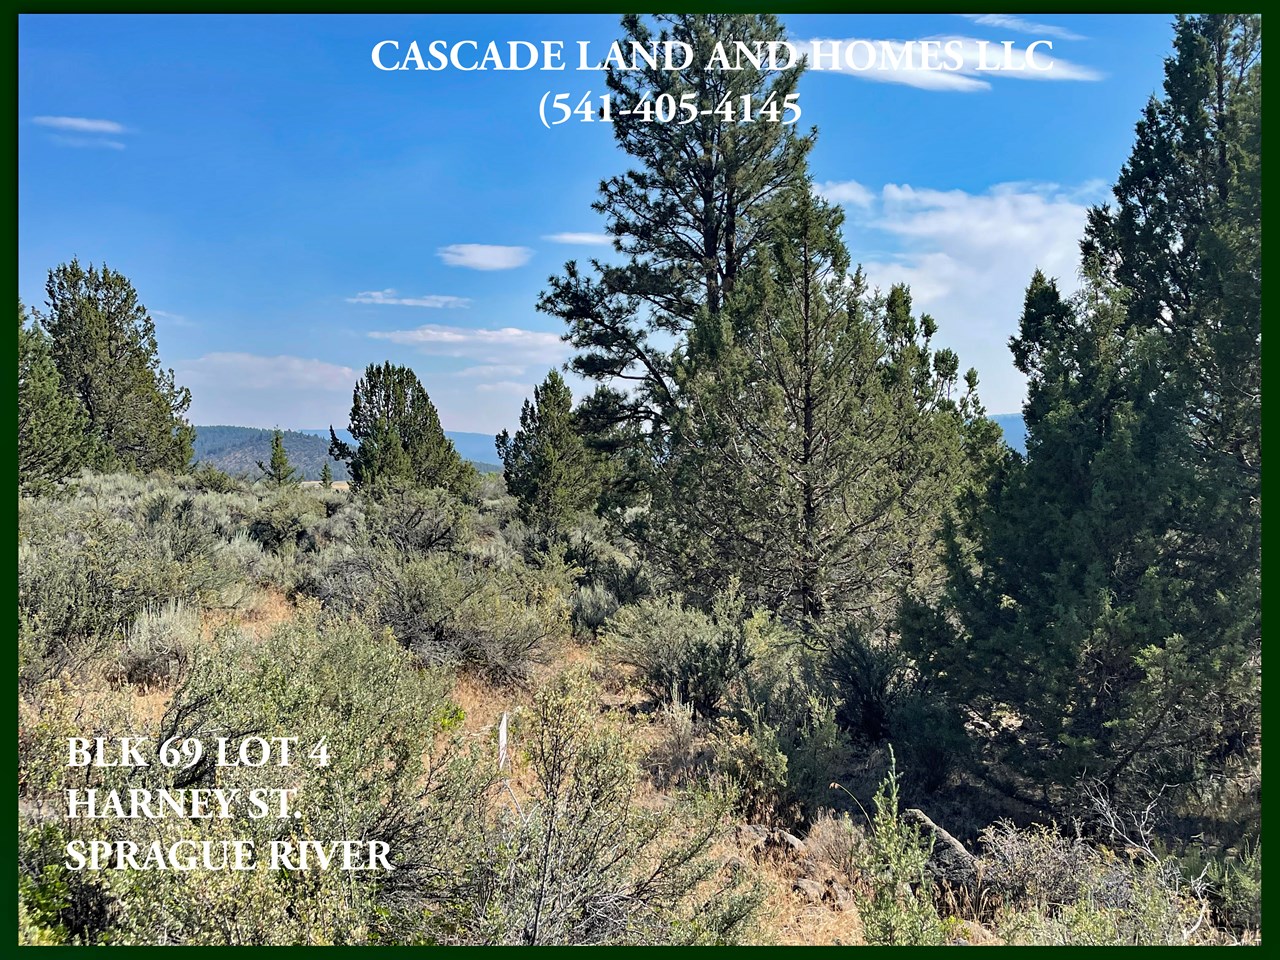 large 1.72~acre parcel that slopes upward to provide gorgeous views of the sprague river and the surrounding valley and pasture land! even though it is located within the subdivision, this property is very private, and has few neighbors. it's so peaceful here! while standing on the property, all i could hear was the wind in the trees and the occasional bird overhead. there is even has a seasonal creek that runs through the property! if you are looking for a place to have a vacation spot to get away from city life, or a spot for a home in the country, this could be it!